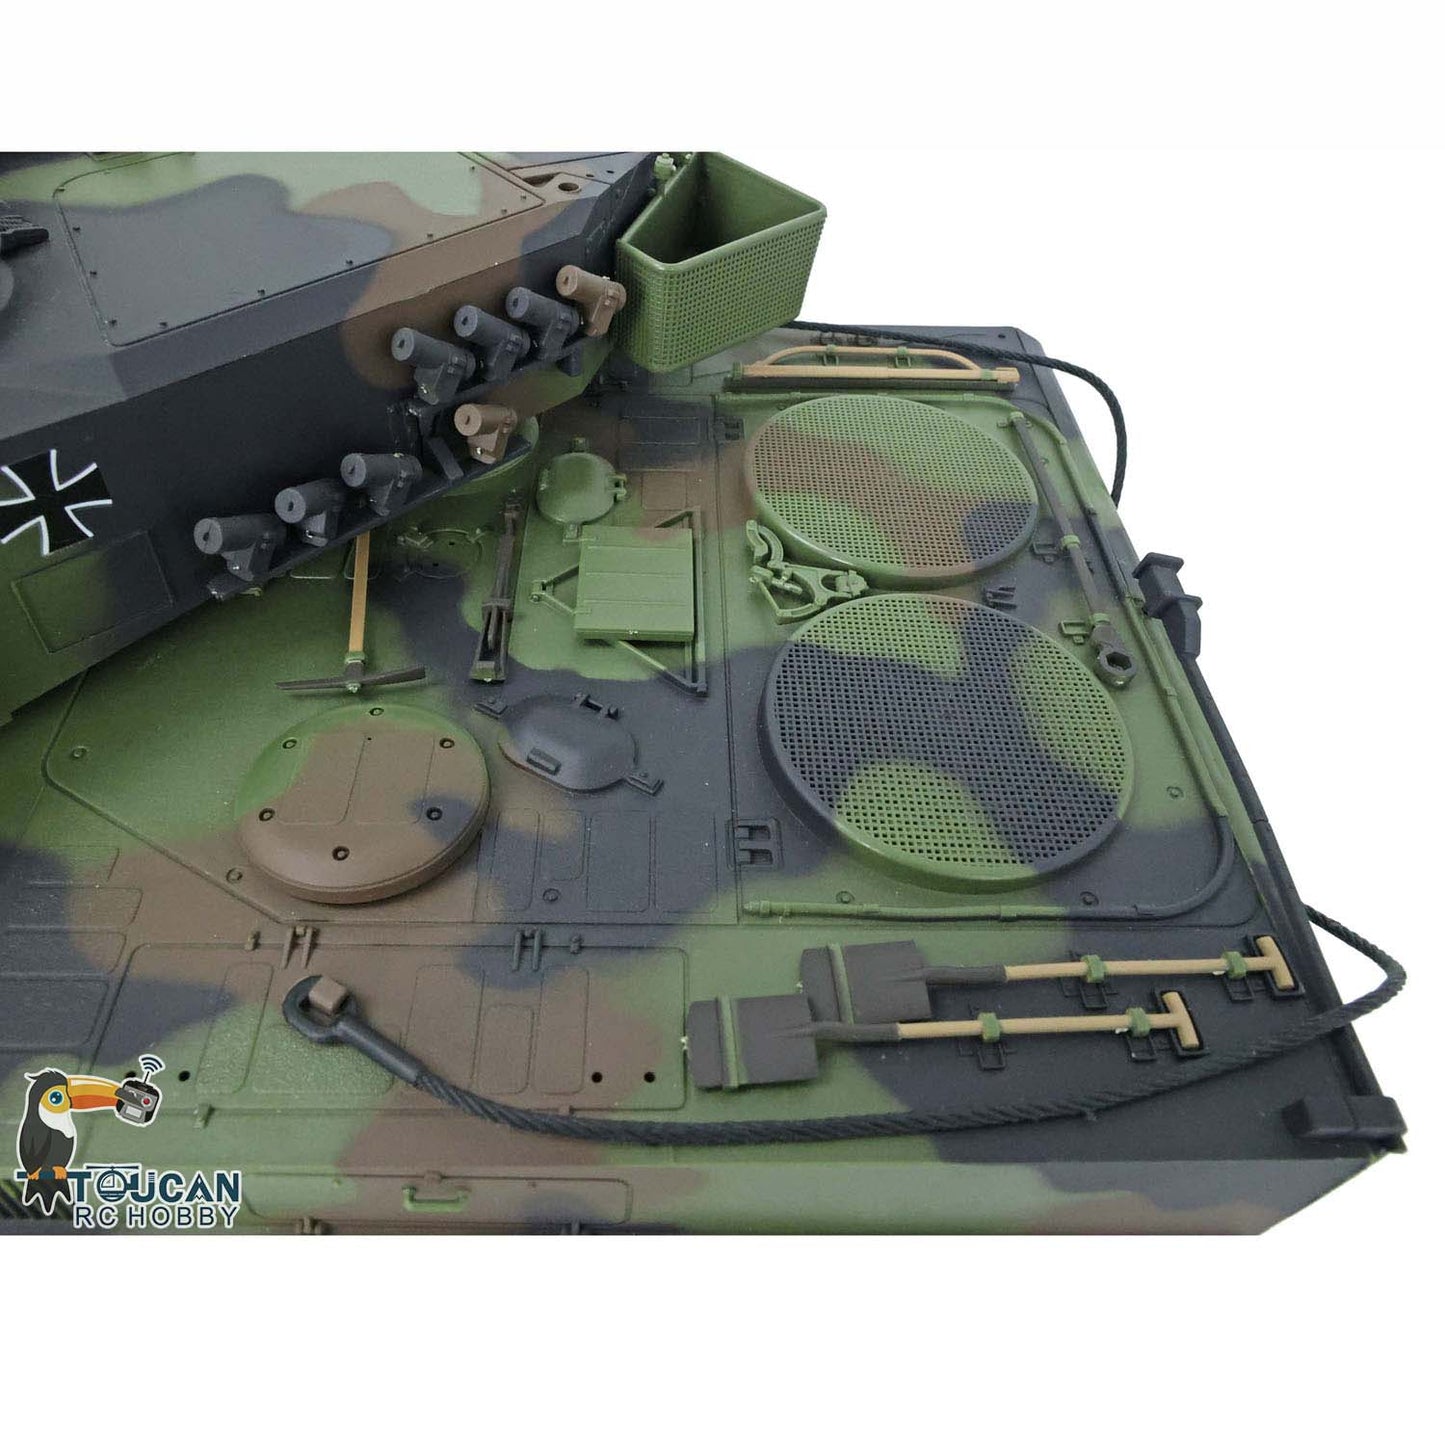 IN STOCK Henglong Military Tank Model 1/16 TK7.0 Leopard2A6 RC Tank Model Upgraded 3889 360 Rotating Turret Metal Tracks W/ Rubber Pad